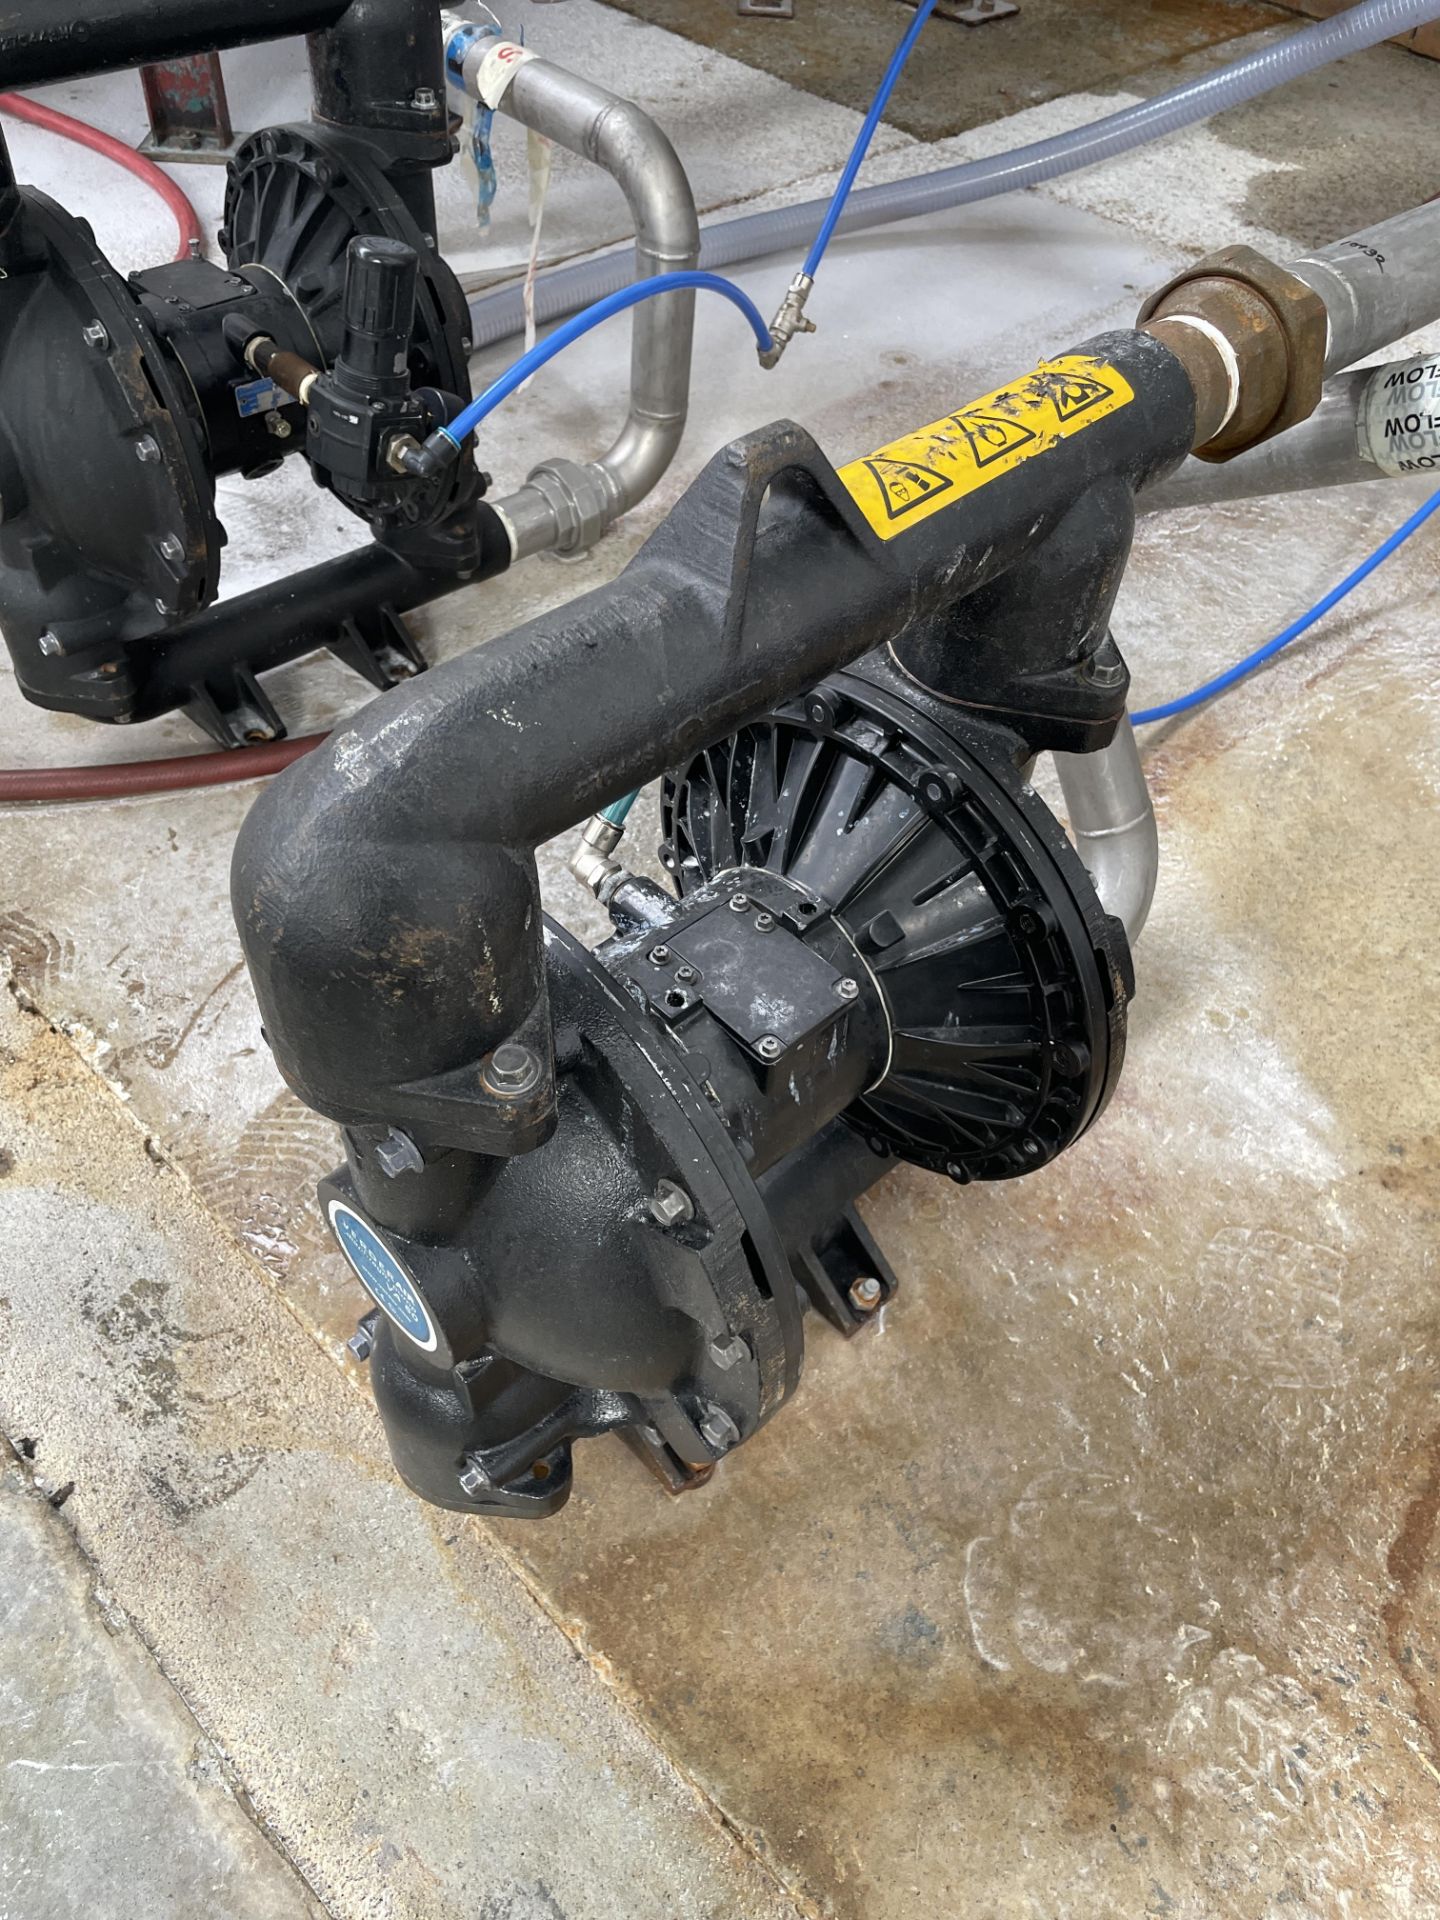 Verderair VA50 Diaphragm Pump (Contractors take out charge - £20) Please read the following